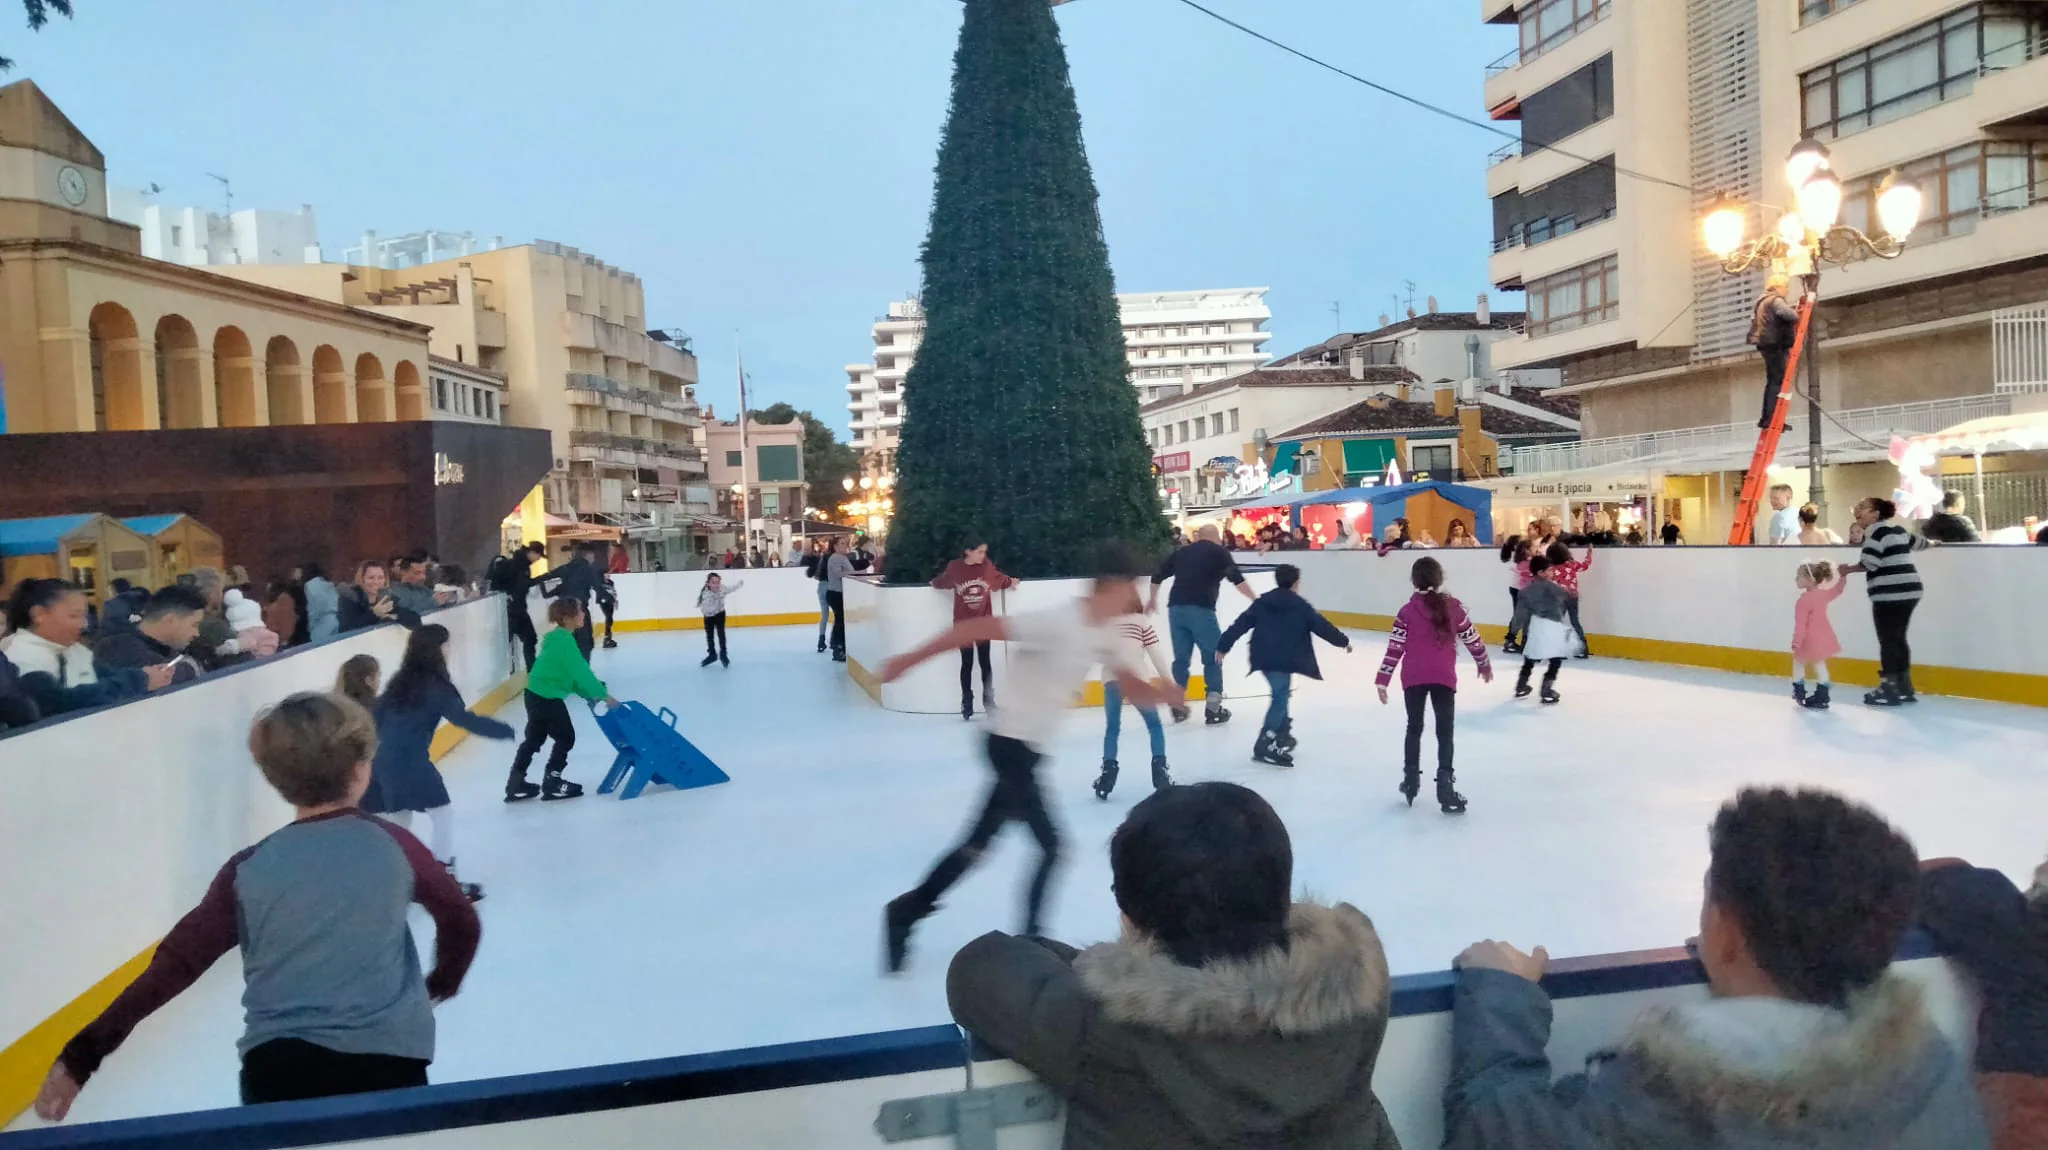 Get your skates on in Torremolinos to welcome in the festive season